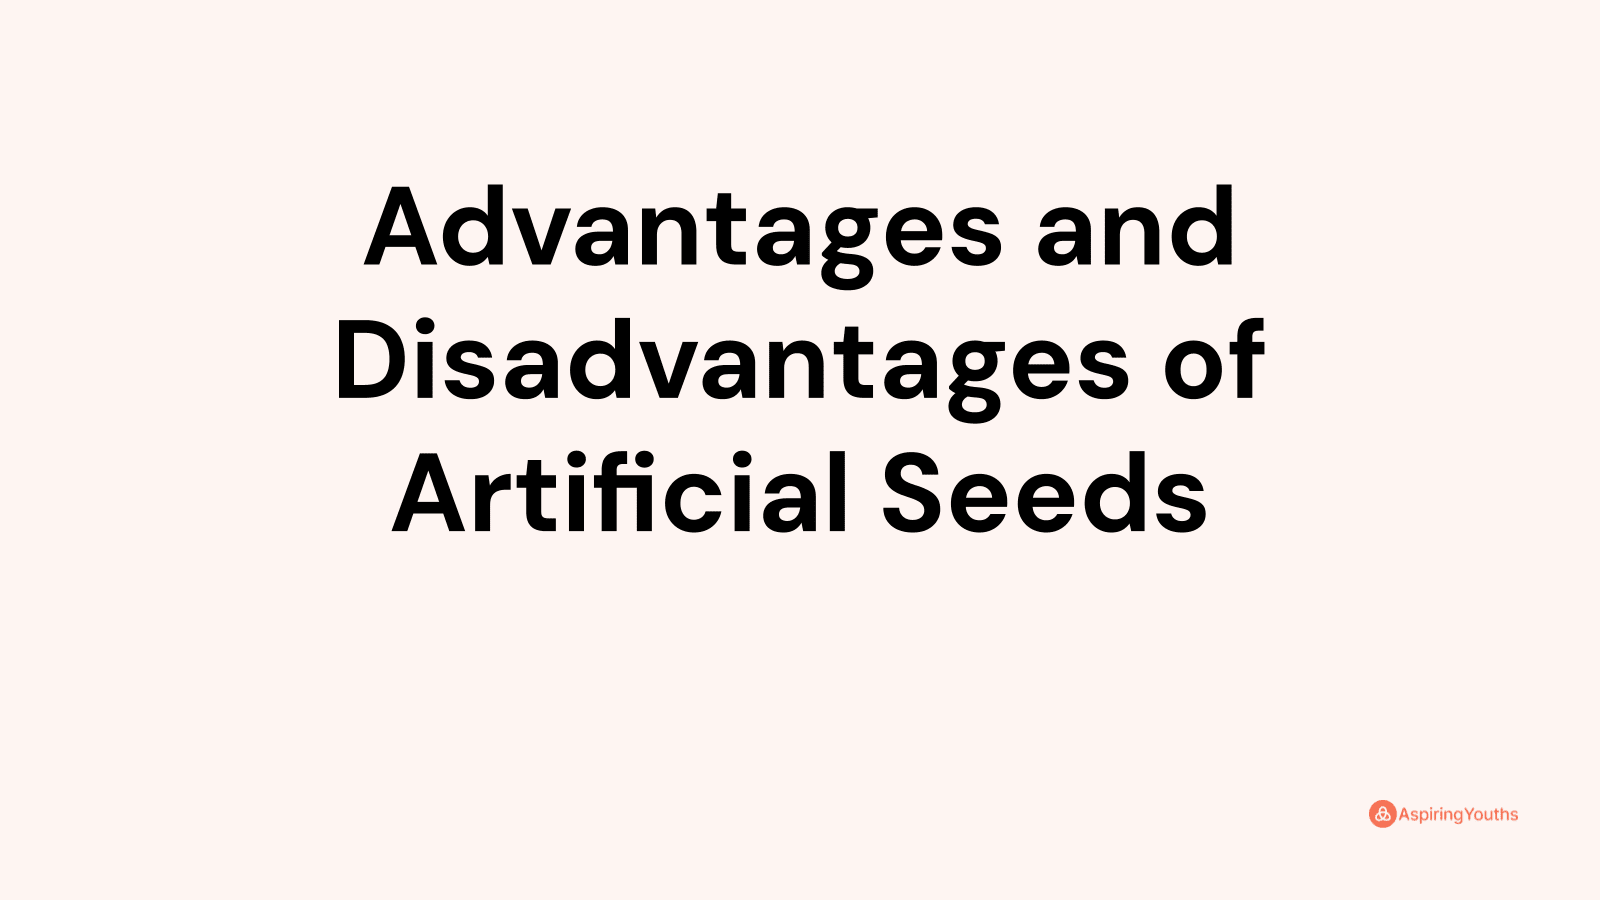 Advantages and disadvantages of Artificial Seeds